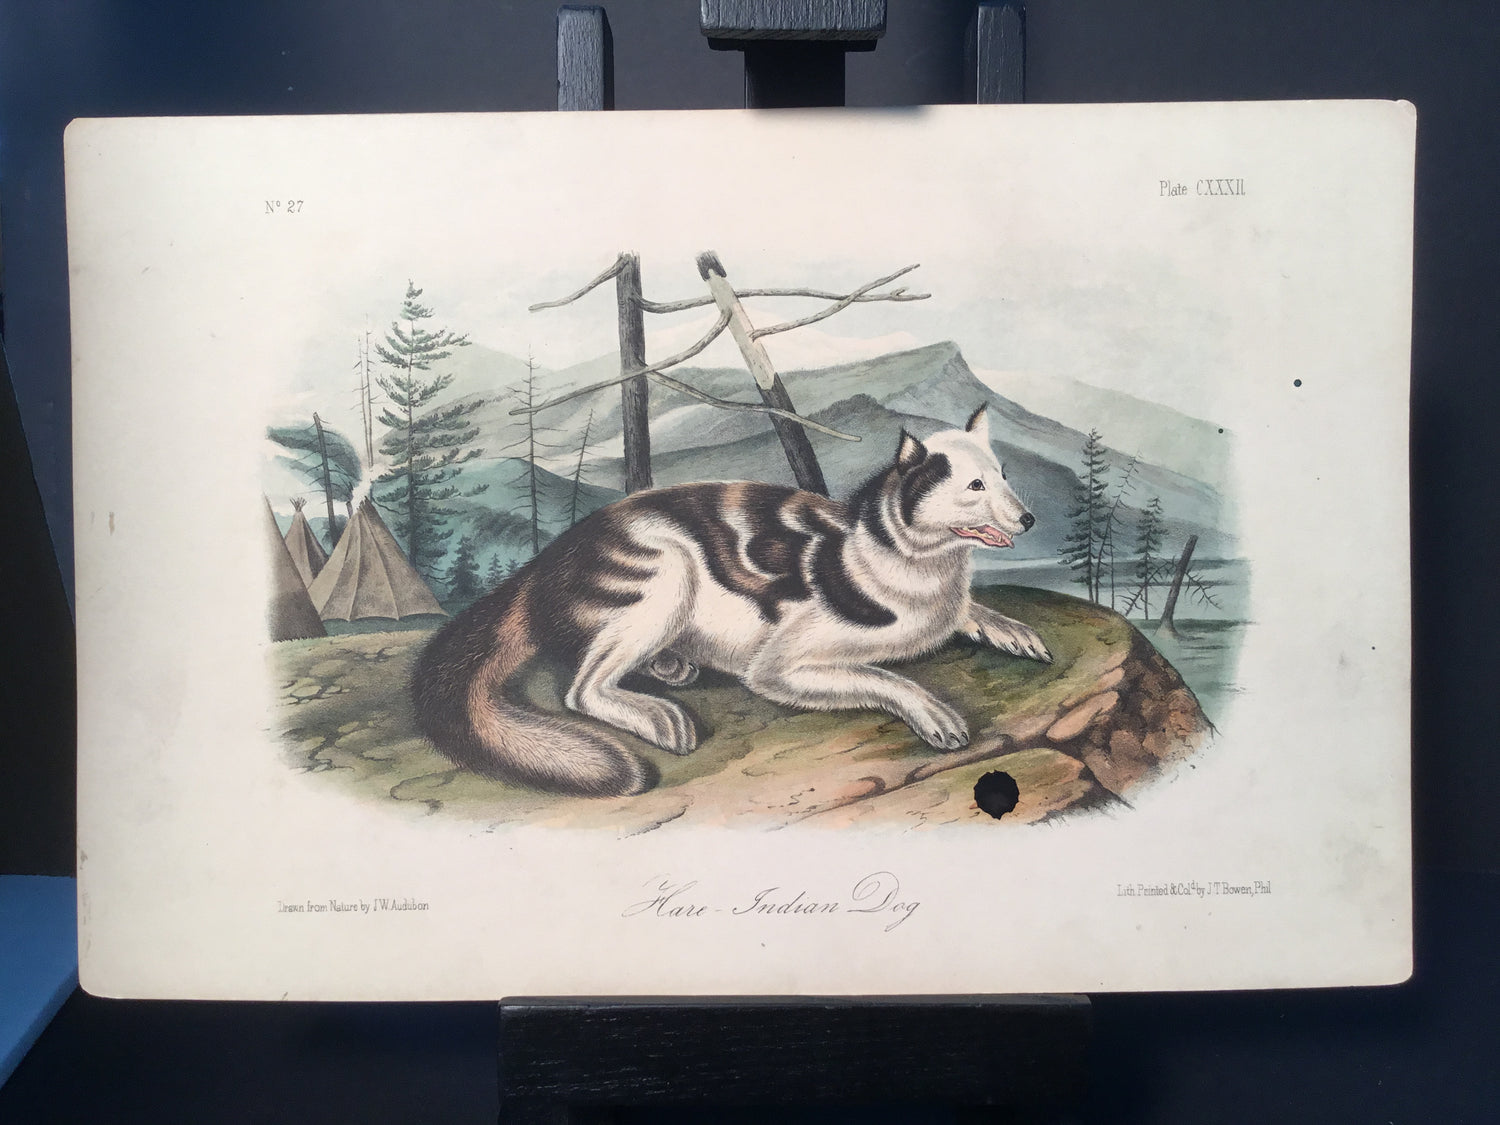 Lord-Hopkins Collection - Hare Indian Dog